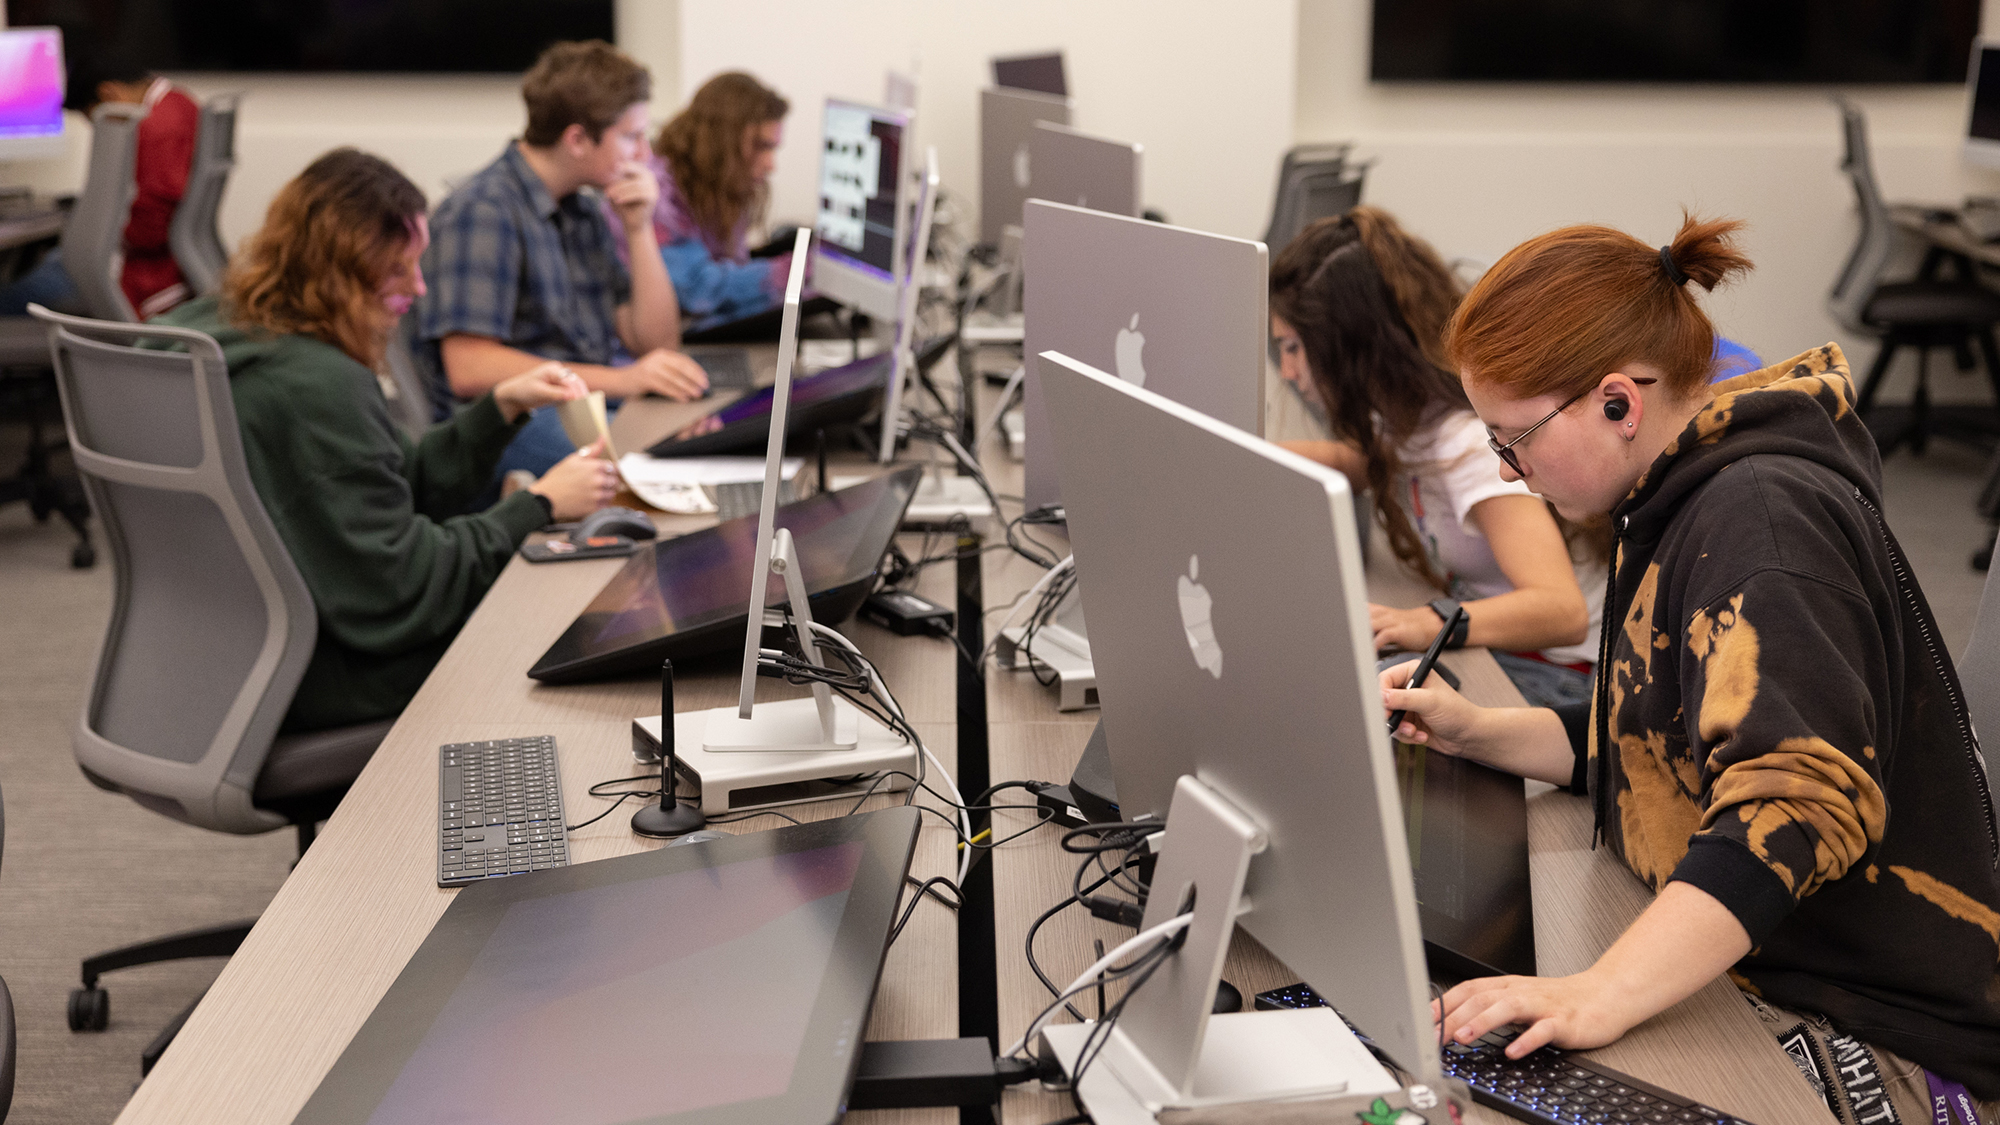 Students work at computer stations.